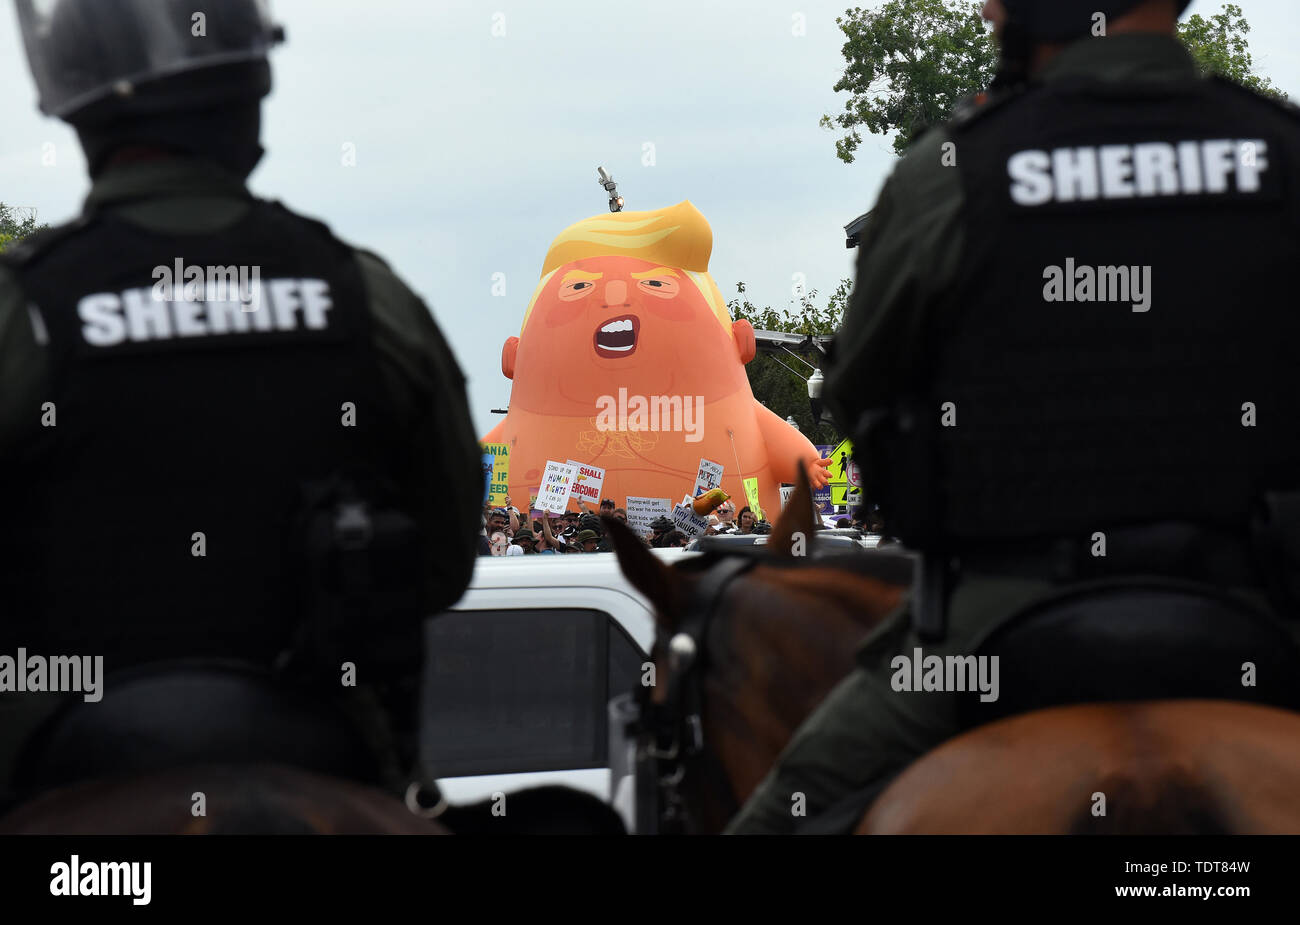 Orlando, Florida, USA. 18th June, 2019. Police separate Trump supporters and Trump protesters near the site of a Make America Great Again rally at the Amway Center on June 18, 2019 in Orlando, Florida. The rally is billed as U.S. President Donald Trump's kick-off event for his campaign for re-election in 2020. Credit: Paul Hennessy/Alamy Live News Stock Photo